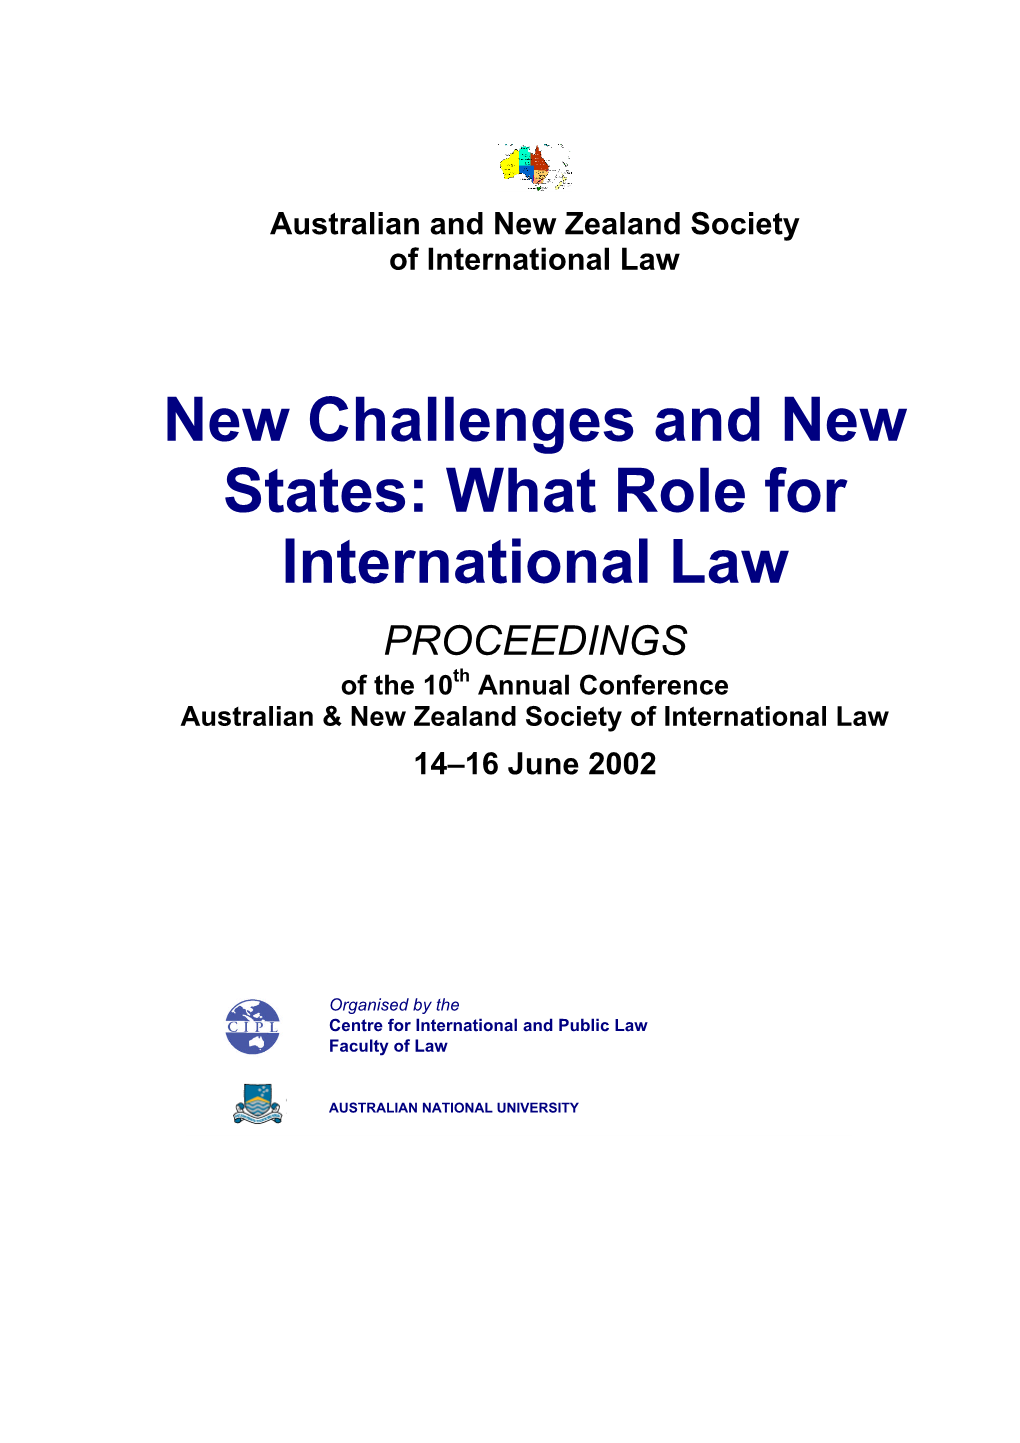 New Challenges and New States: What Role for International